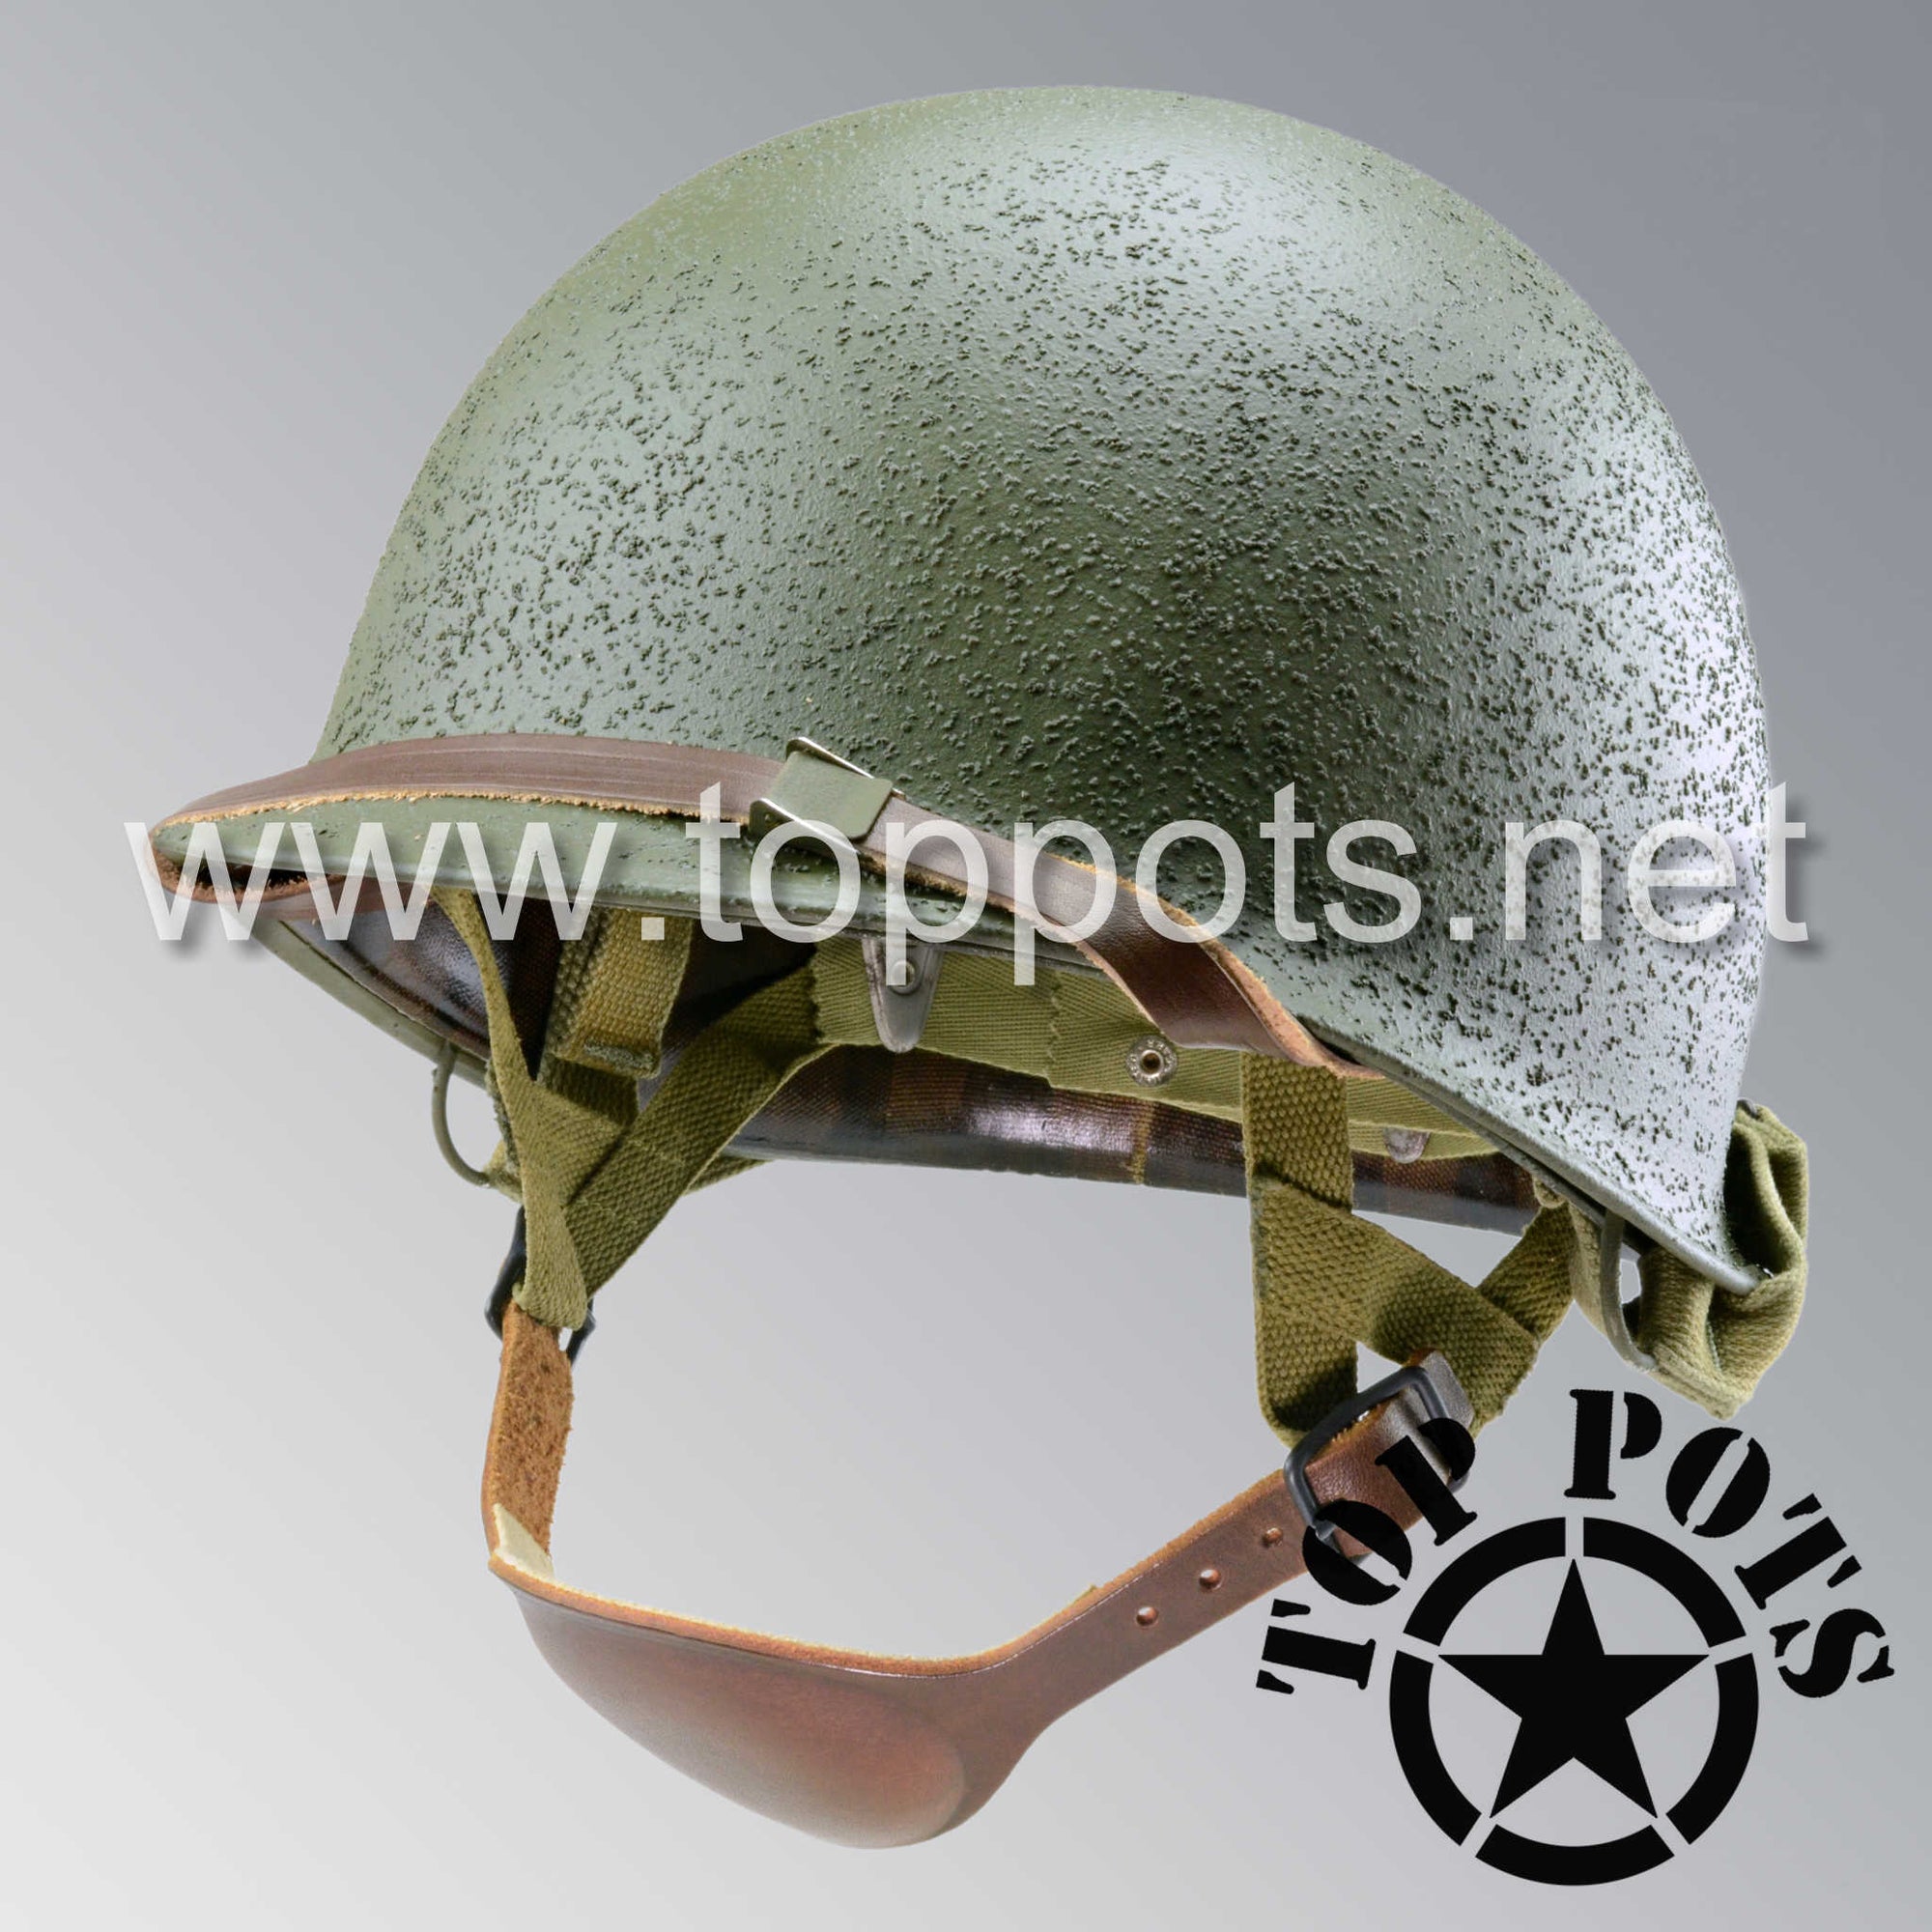 WWII US Army Restored Original M2 Paratrooper Airborne Helmet D Bale Shell and Liner with Inland A Straps